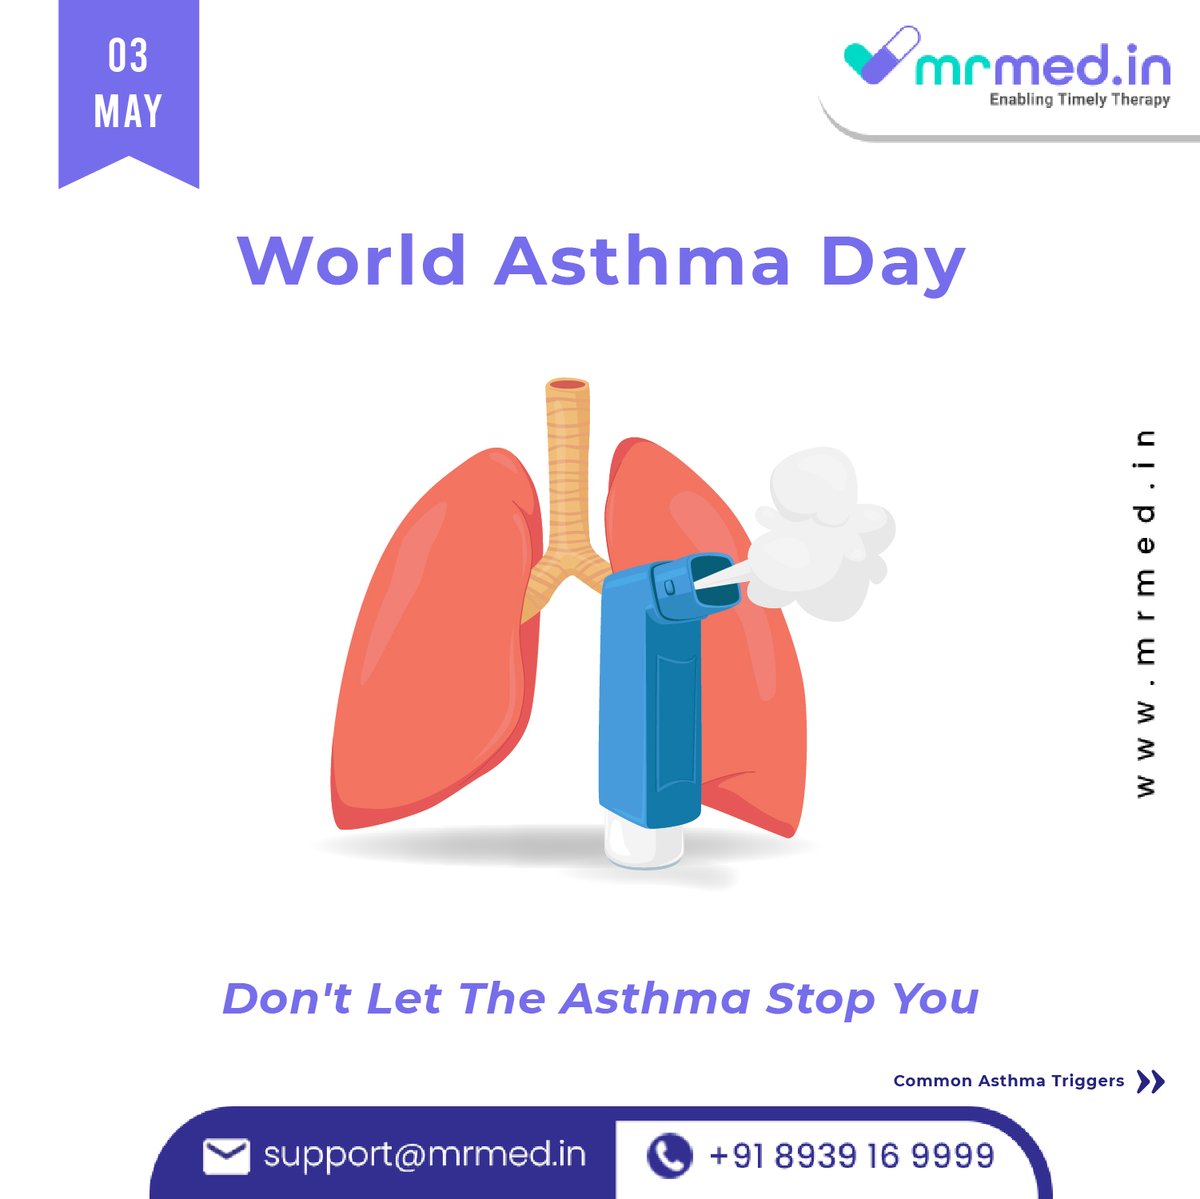 Understanding Your Asthma Triggers Can Help You Manage Them Better and Lower Your Risk Of Symptoms And Asthma Attacks. Lets Be Aware Of Adverse Effects Of Asthma And Create A Breathable Environment For Everyone.

#WorldAsthmaDay #AsthmaTriggers #AsthmaAwareness #MrMed